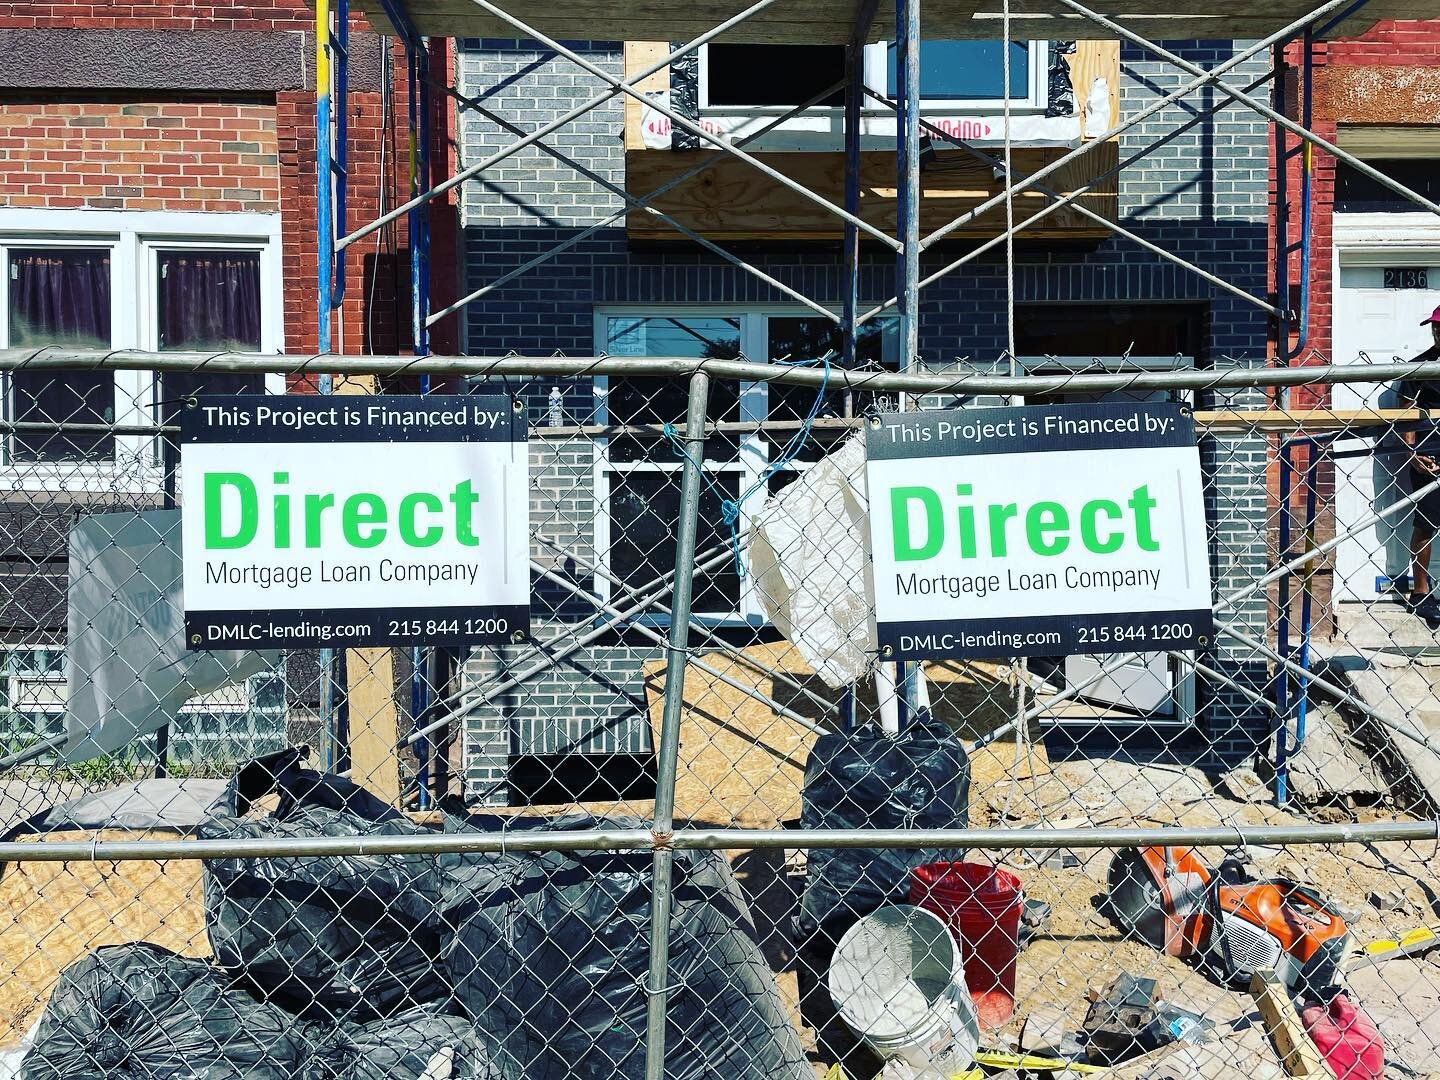 #FinancedByDirect

Reach out to us for financing on your next investment property!

#phillyrealestate #philadelphiarealestate
#realestate #realestateinvesting #phillyrowhomes #philadelphia #philly #phillyfixandflip #fixerupper #fixandflip #investment